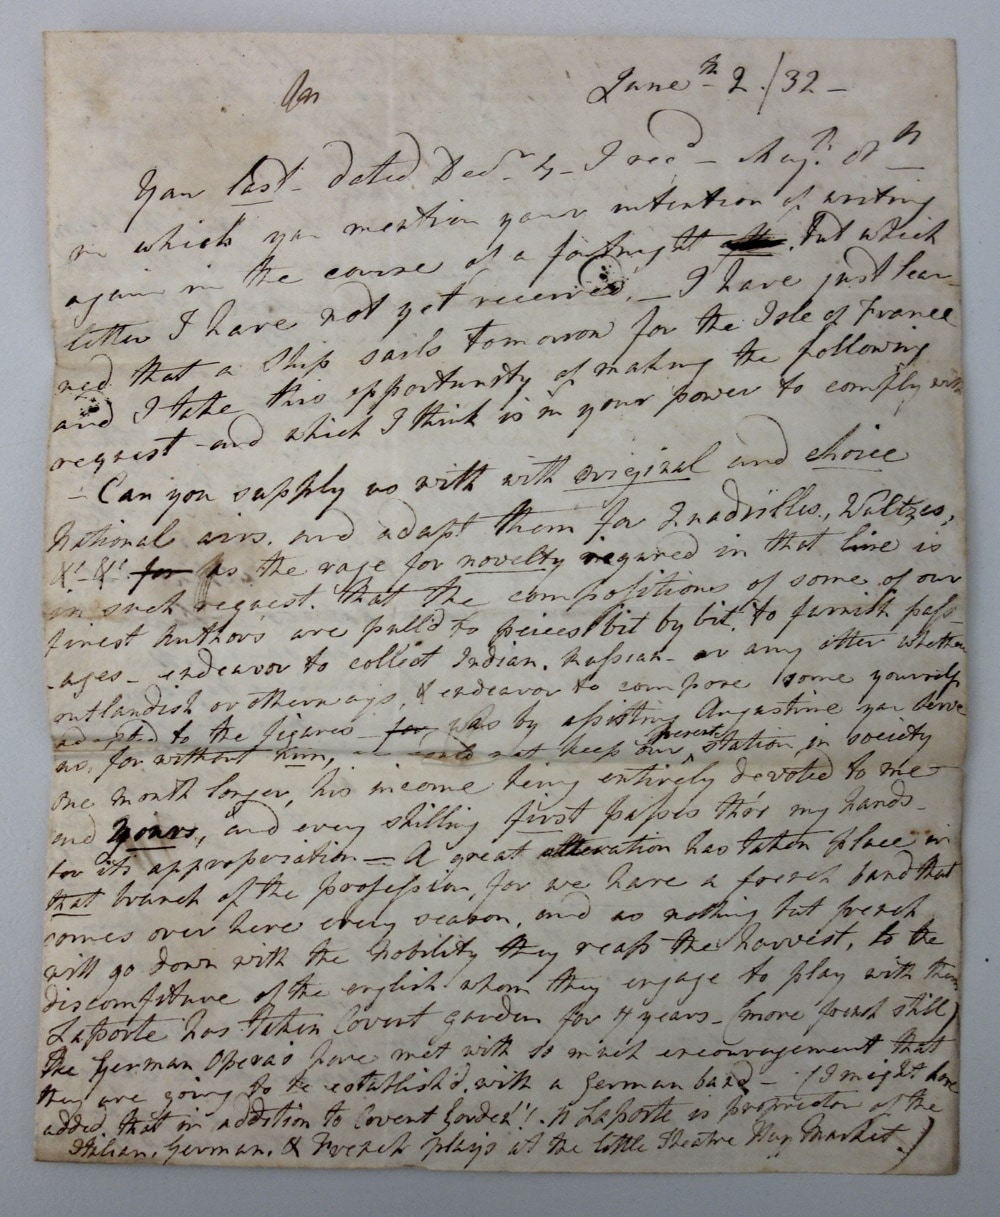 Letter from Susannah Castell, to Cavendish, 2 June 1832